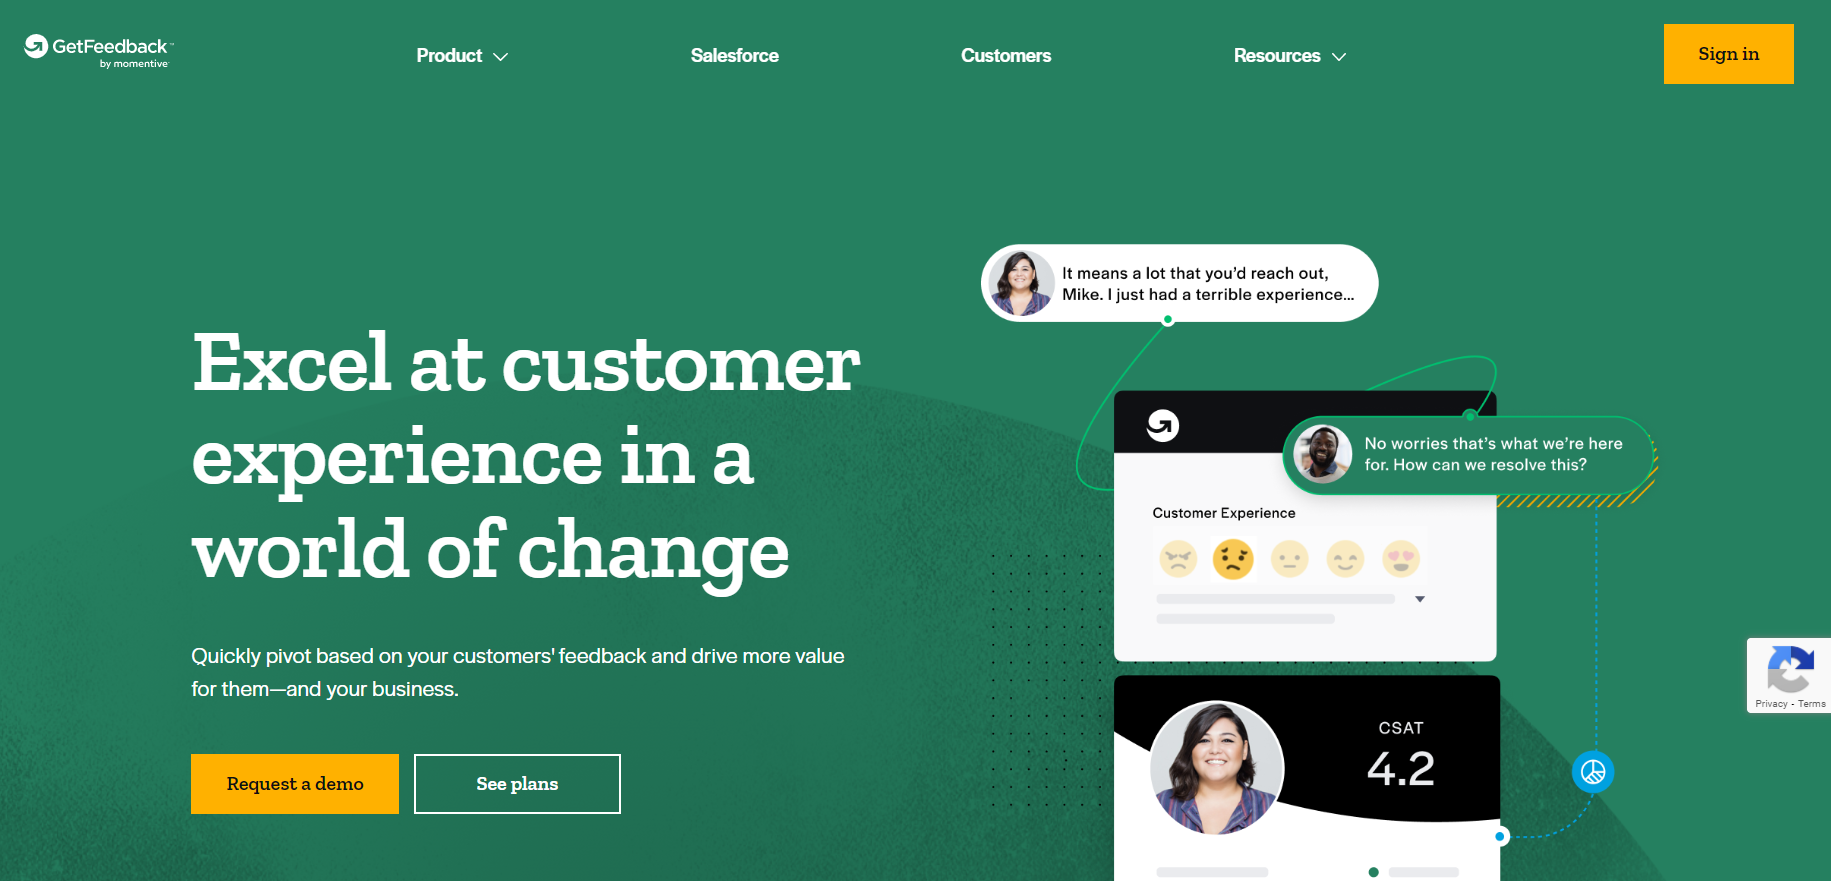 The image is of the GetFeedback homepage, a CSAT tool for measuring customer satisfaction. 